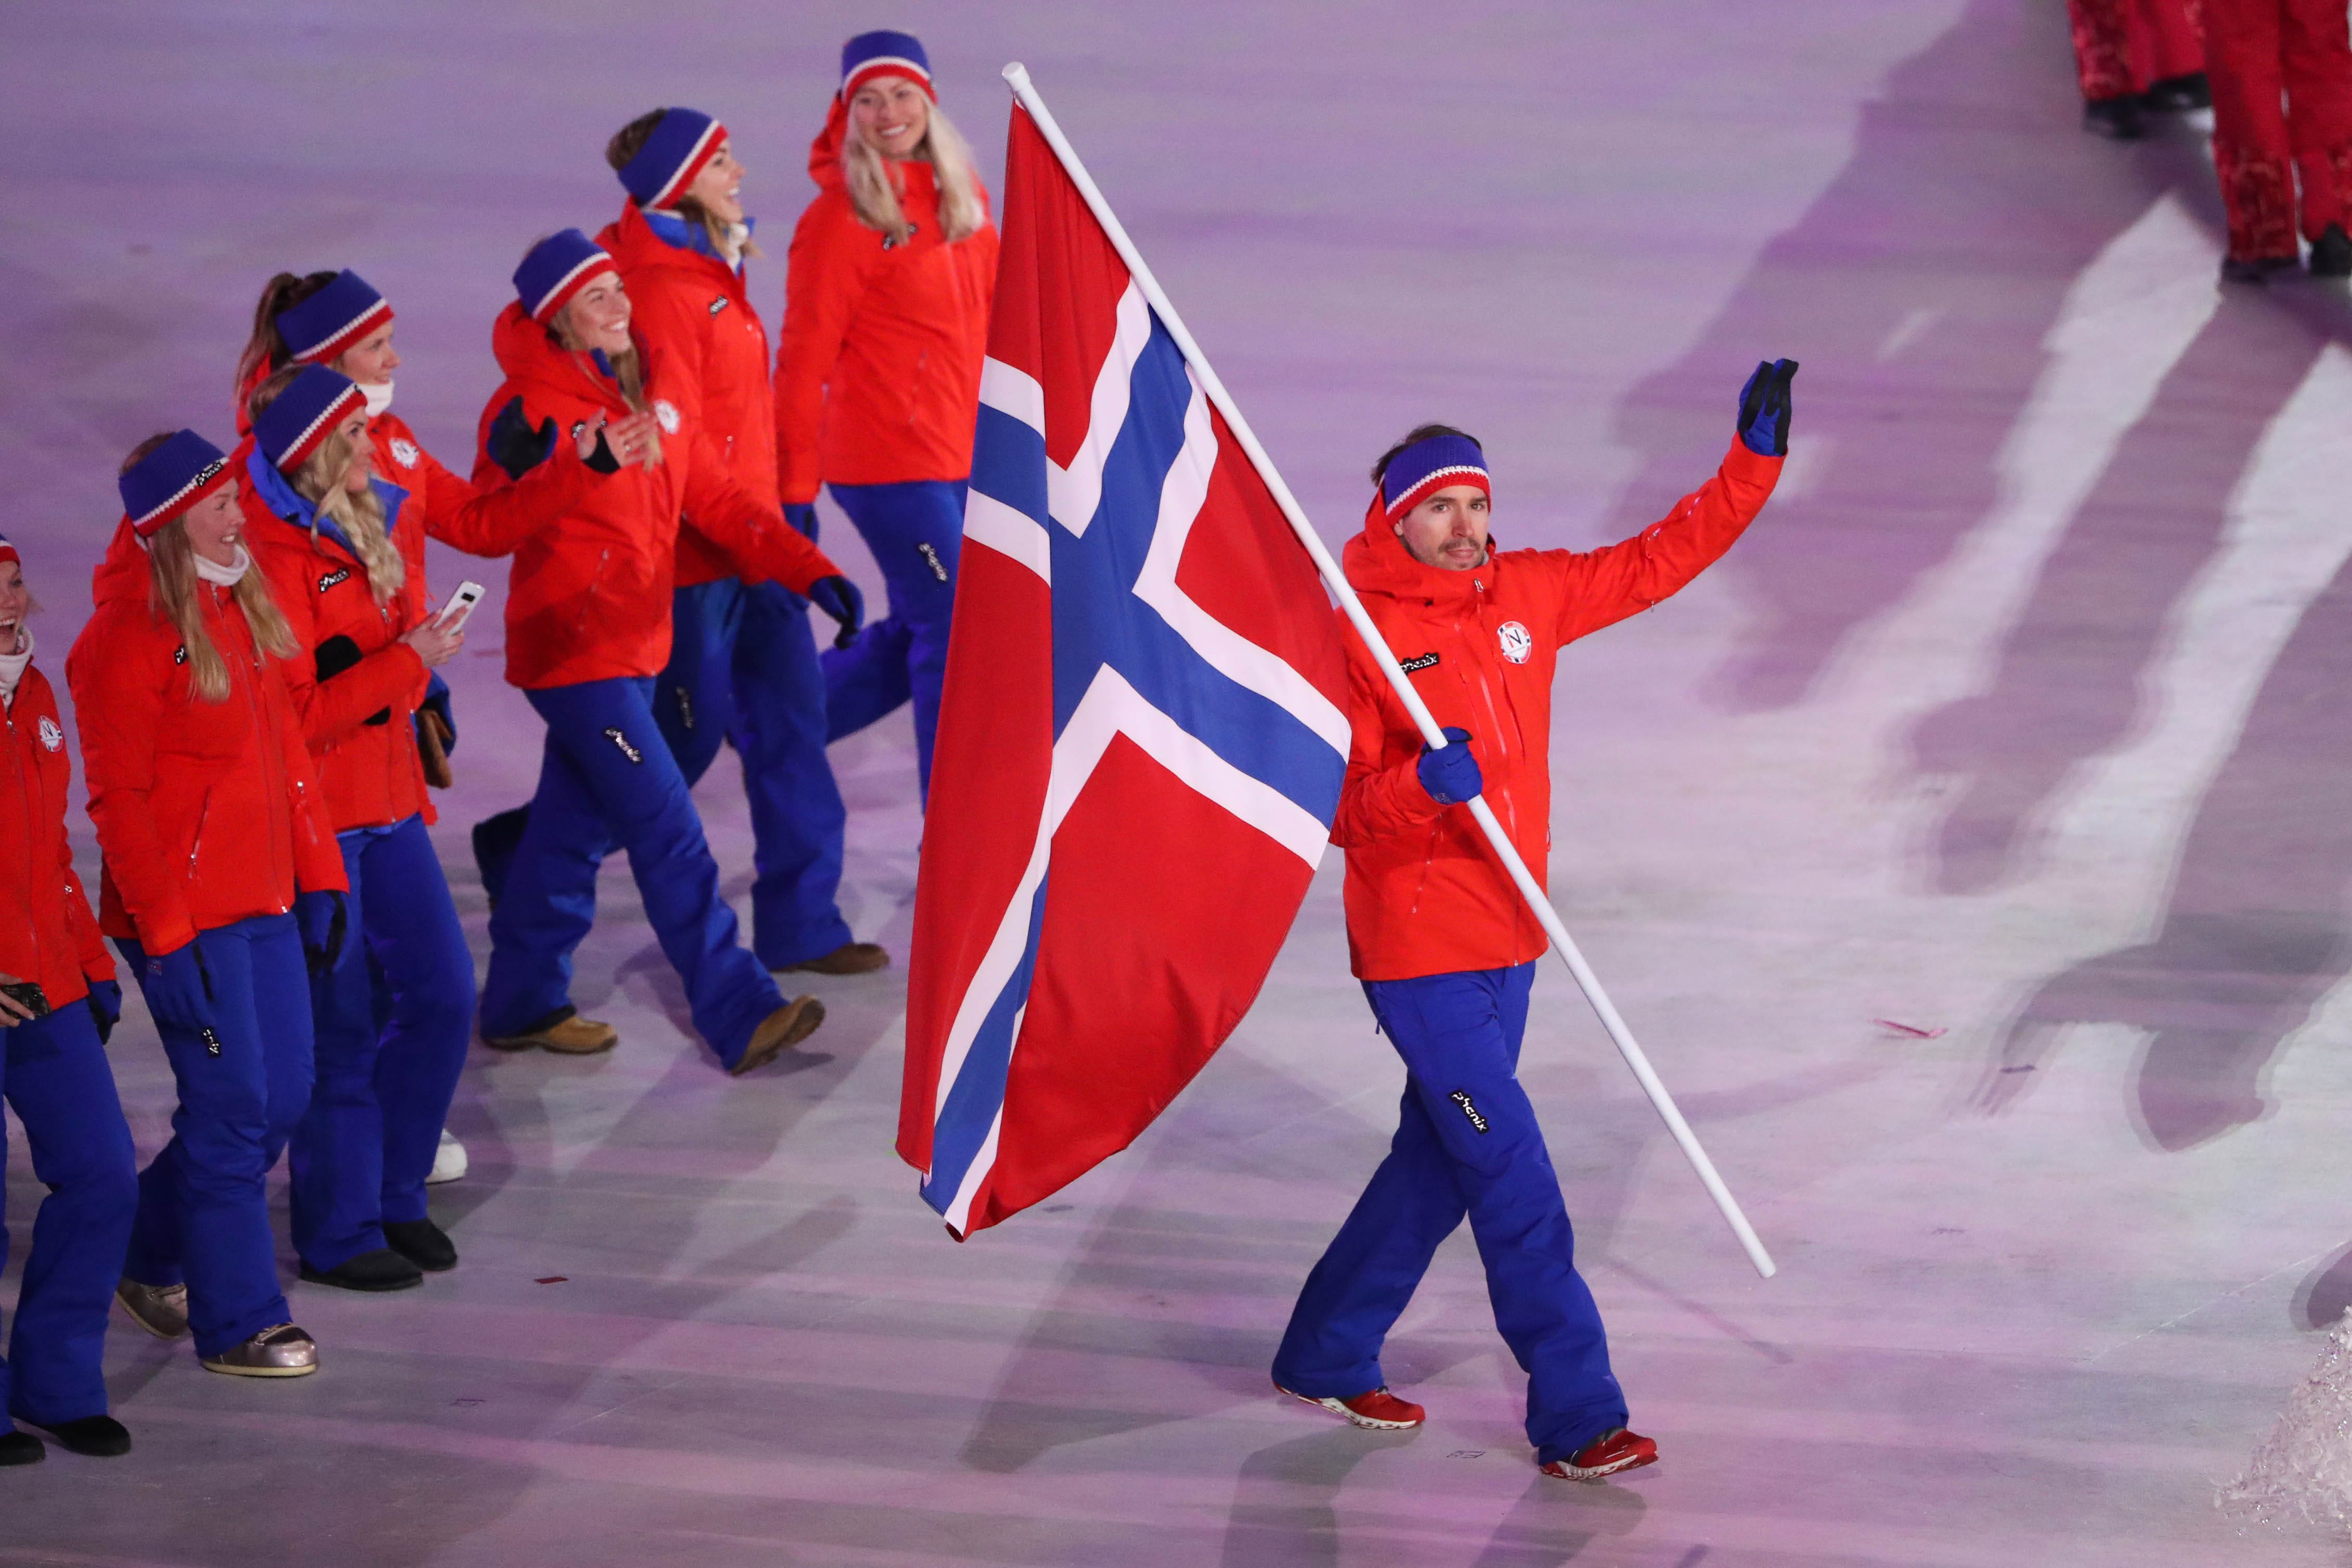 Norway is dominating these Winter Olympics with a unique approach to sports